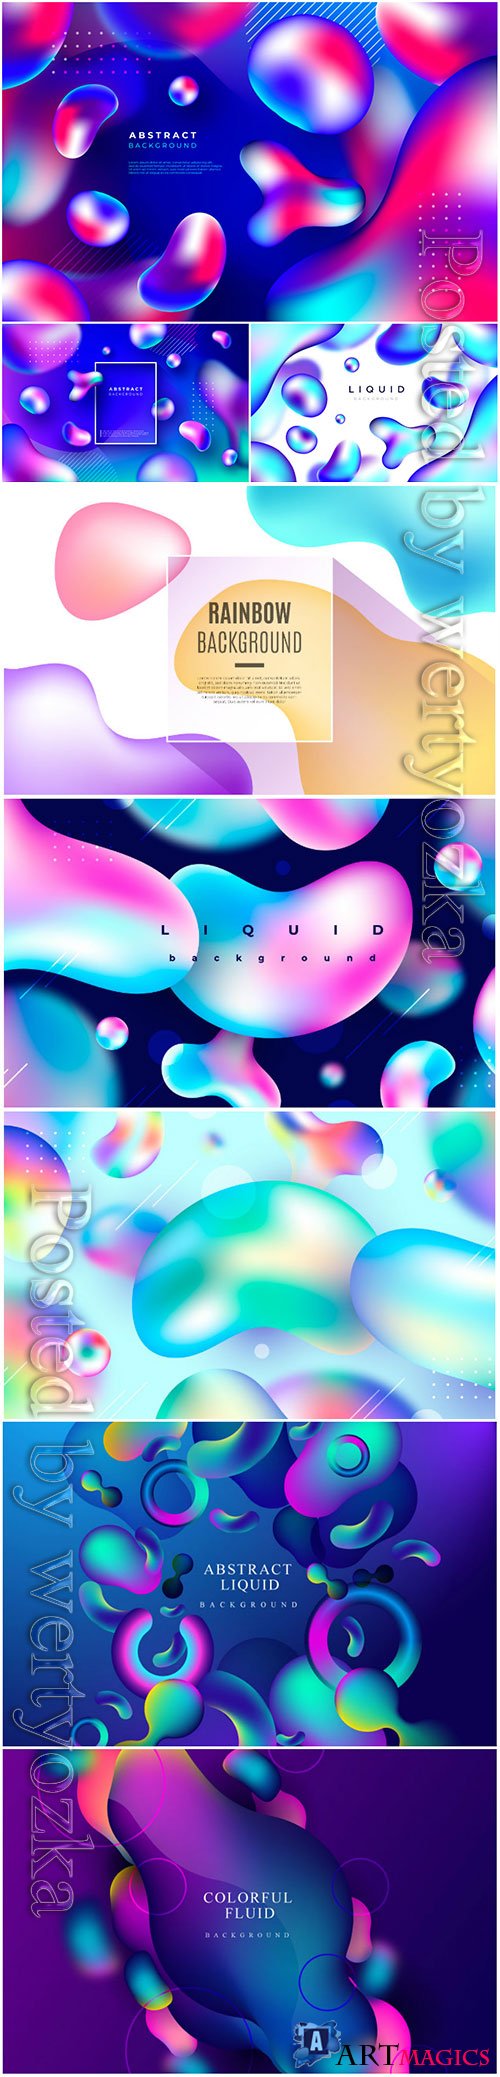 Abstract vector background with liquid shapes